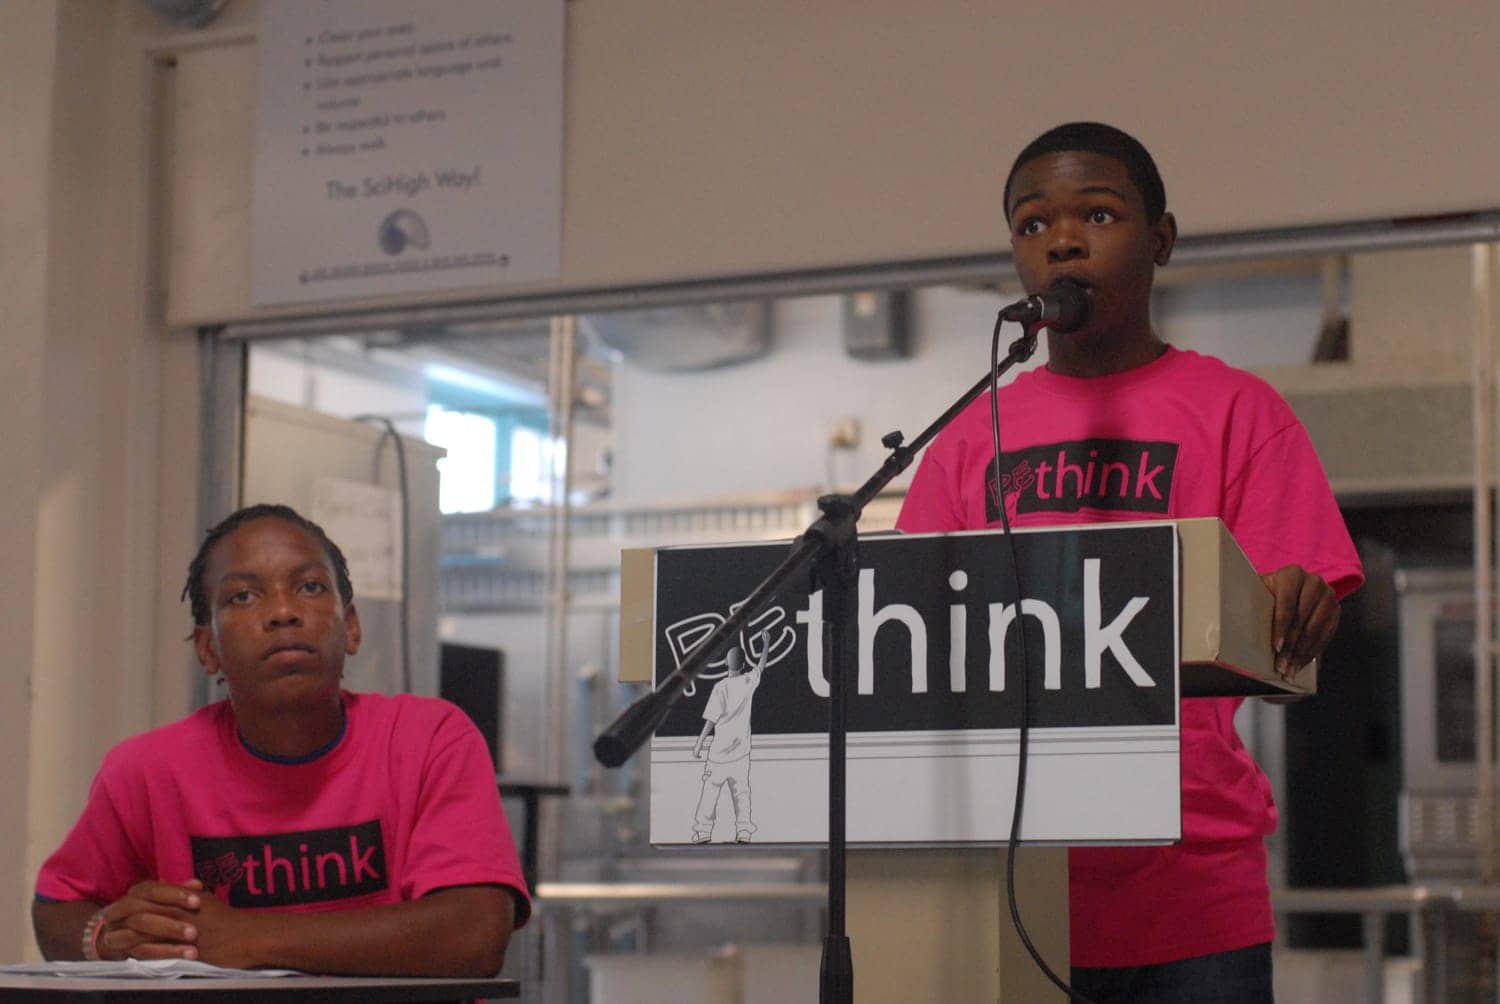 Rethink-New-Orleans-Schools-news-conf-boy-speaker-072111-by-Andy-Cook, New Orleans young Rethinkers take on ‘Candy Bars, Prison Bars’, News & Views 